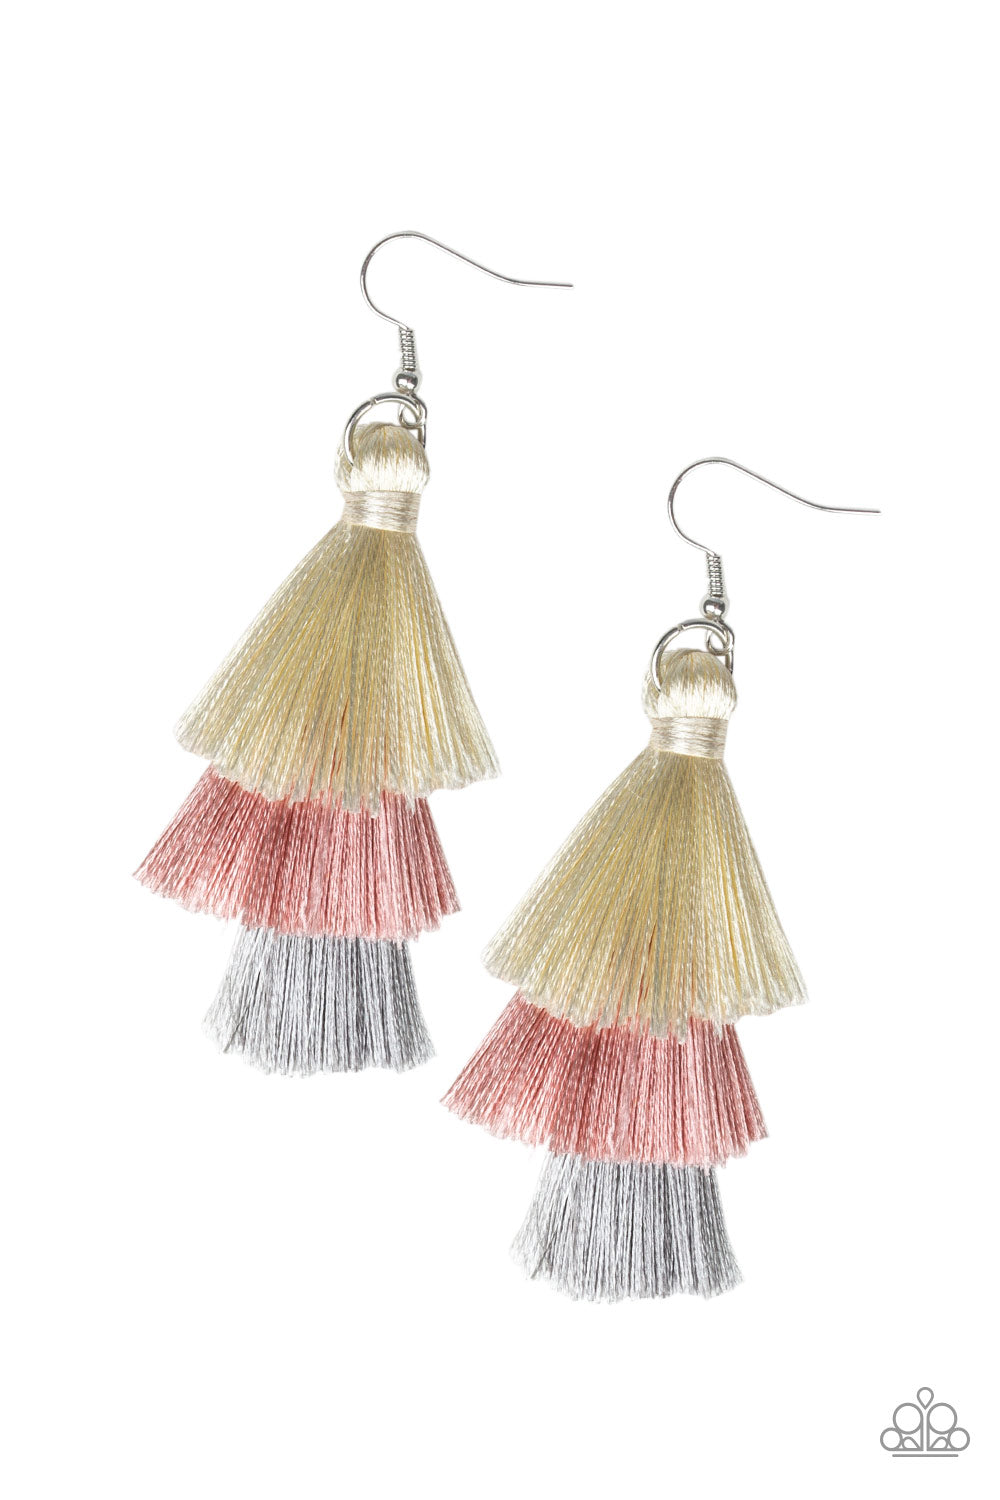 Paparazzi Accessories Hold On to Your Tassel! - Pink Earrings - Lady T Accessories